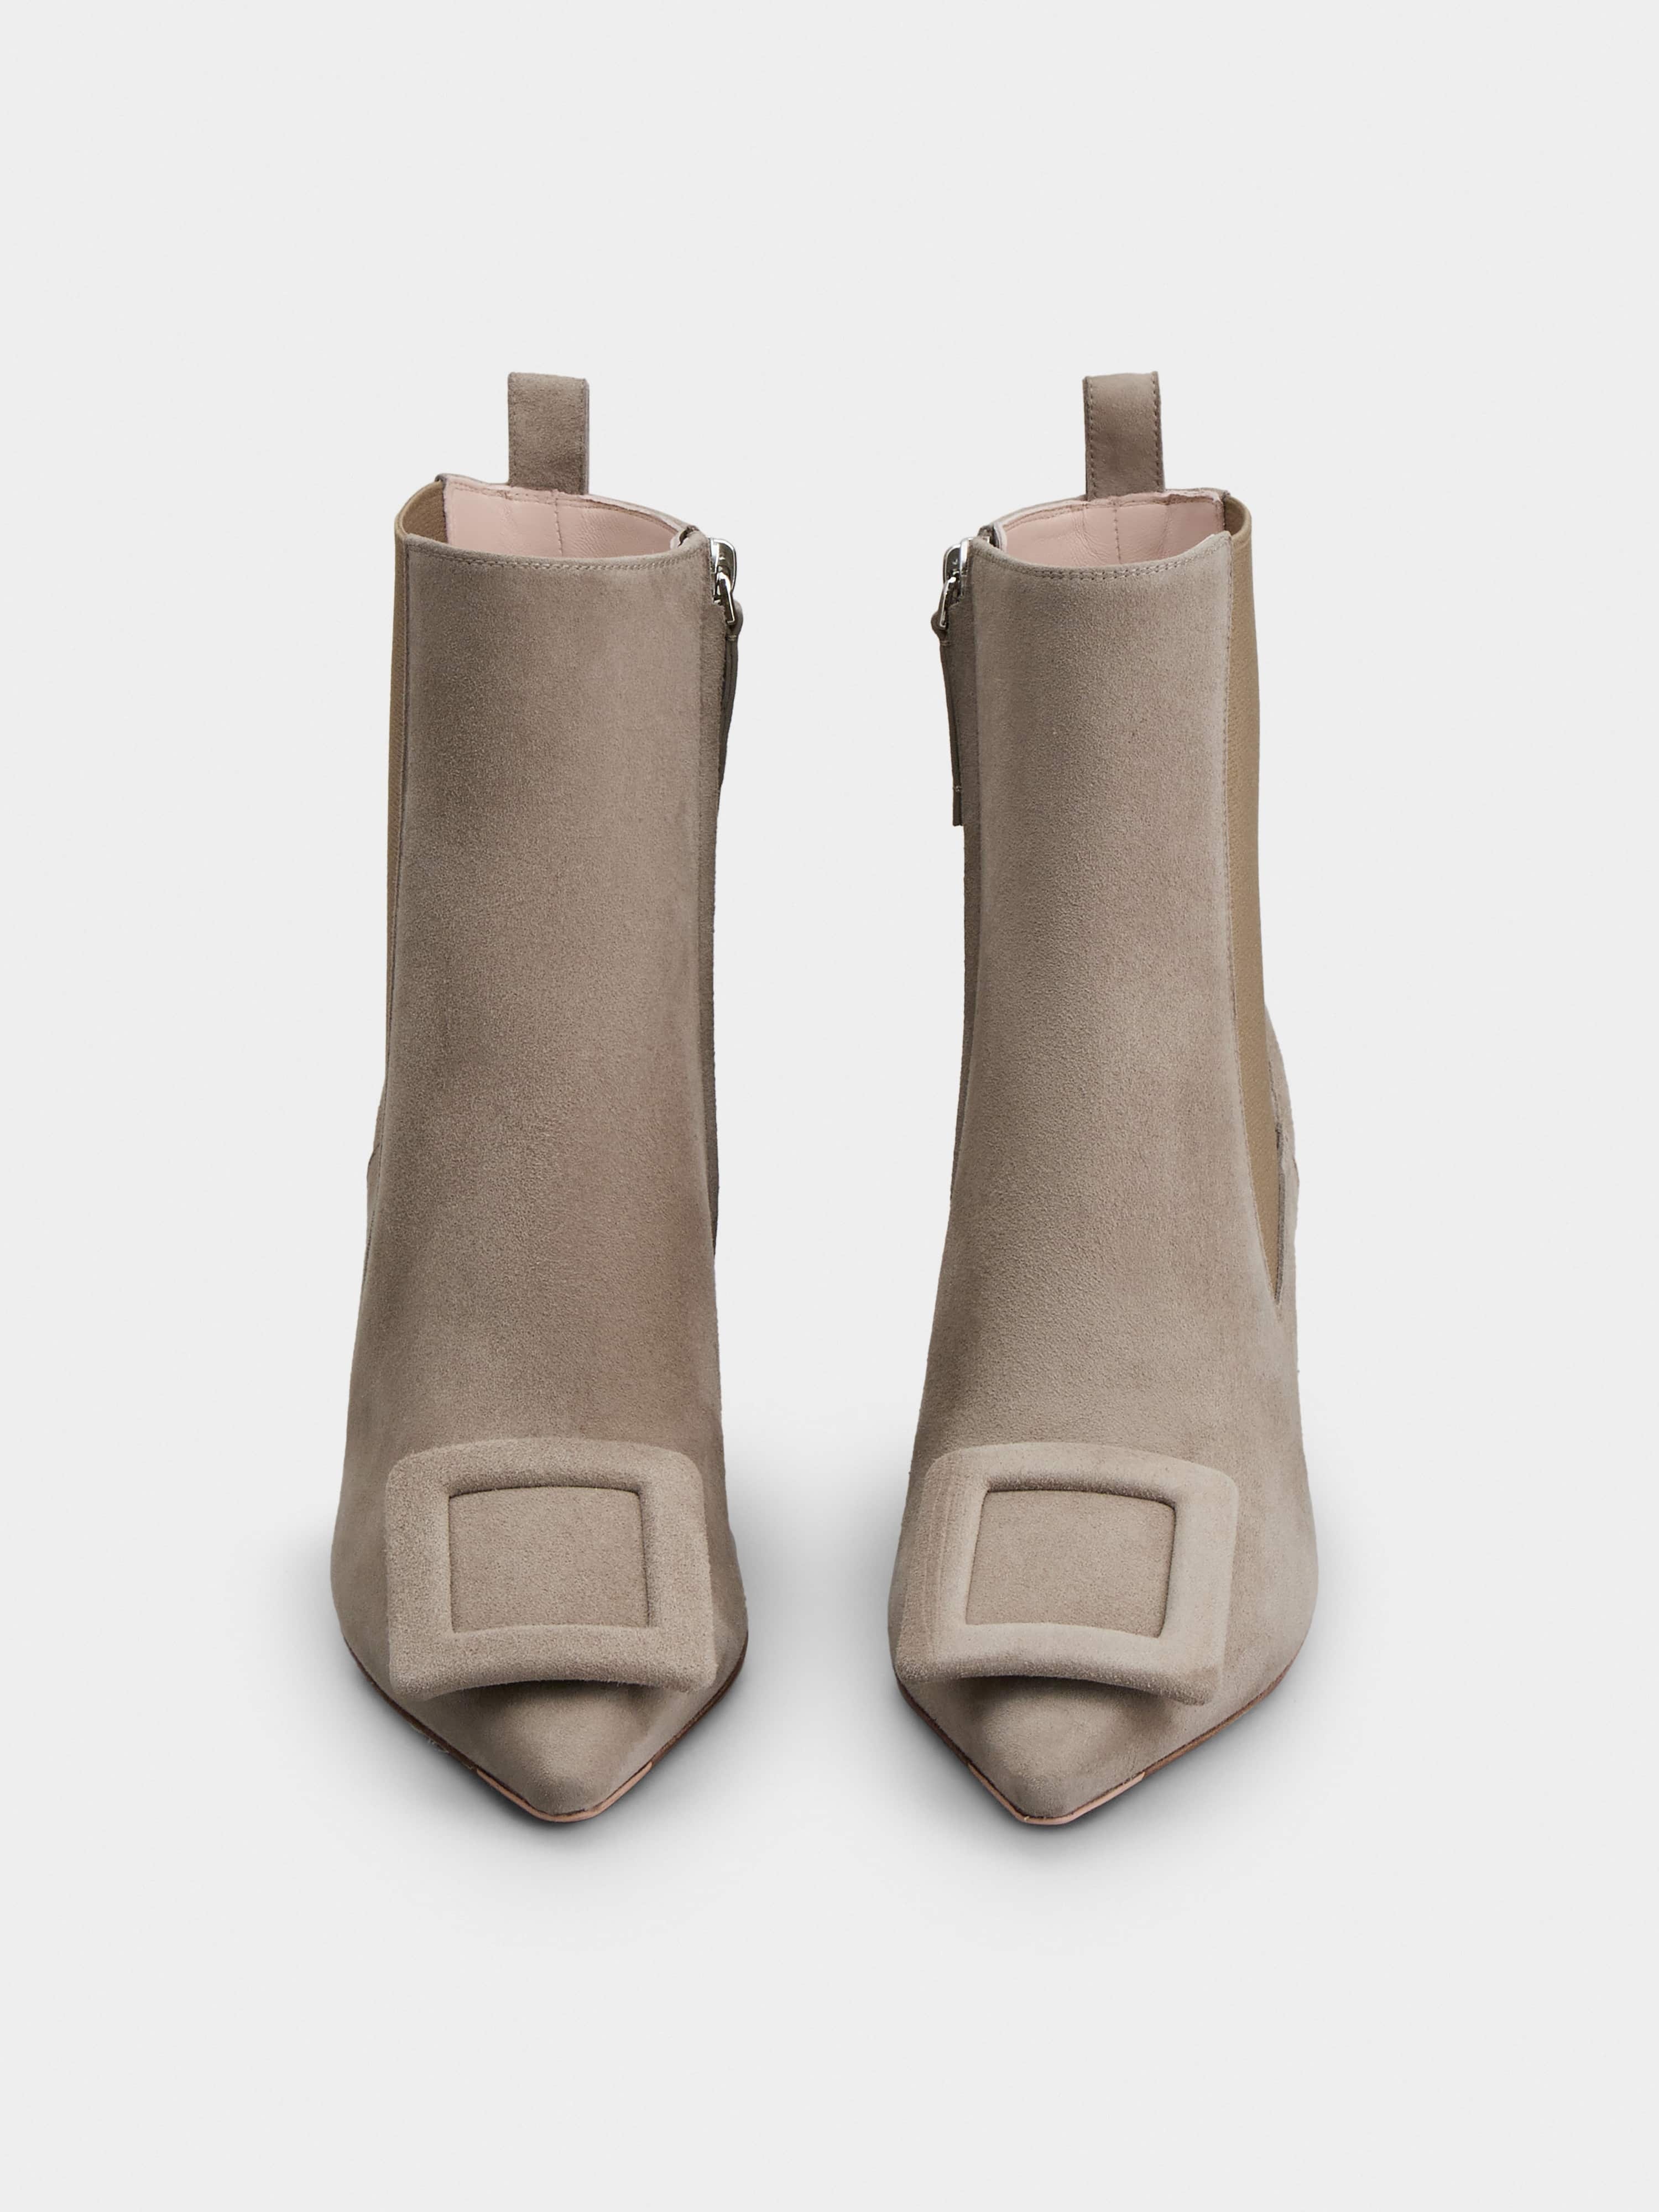 Viv' in The City Booties in Suede - 7